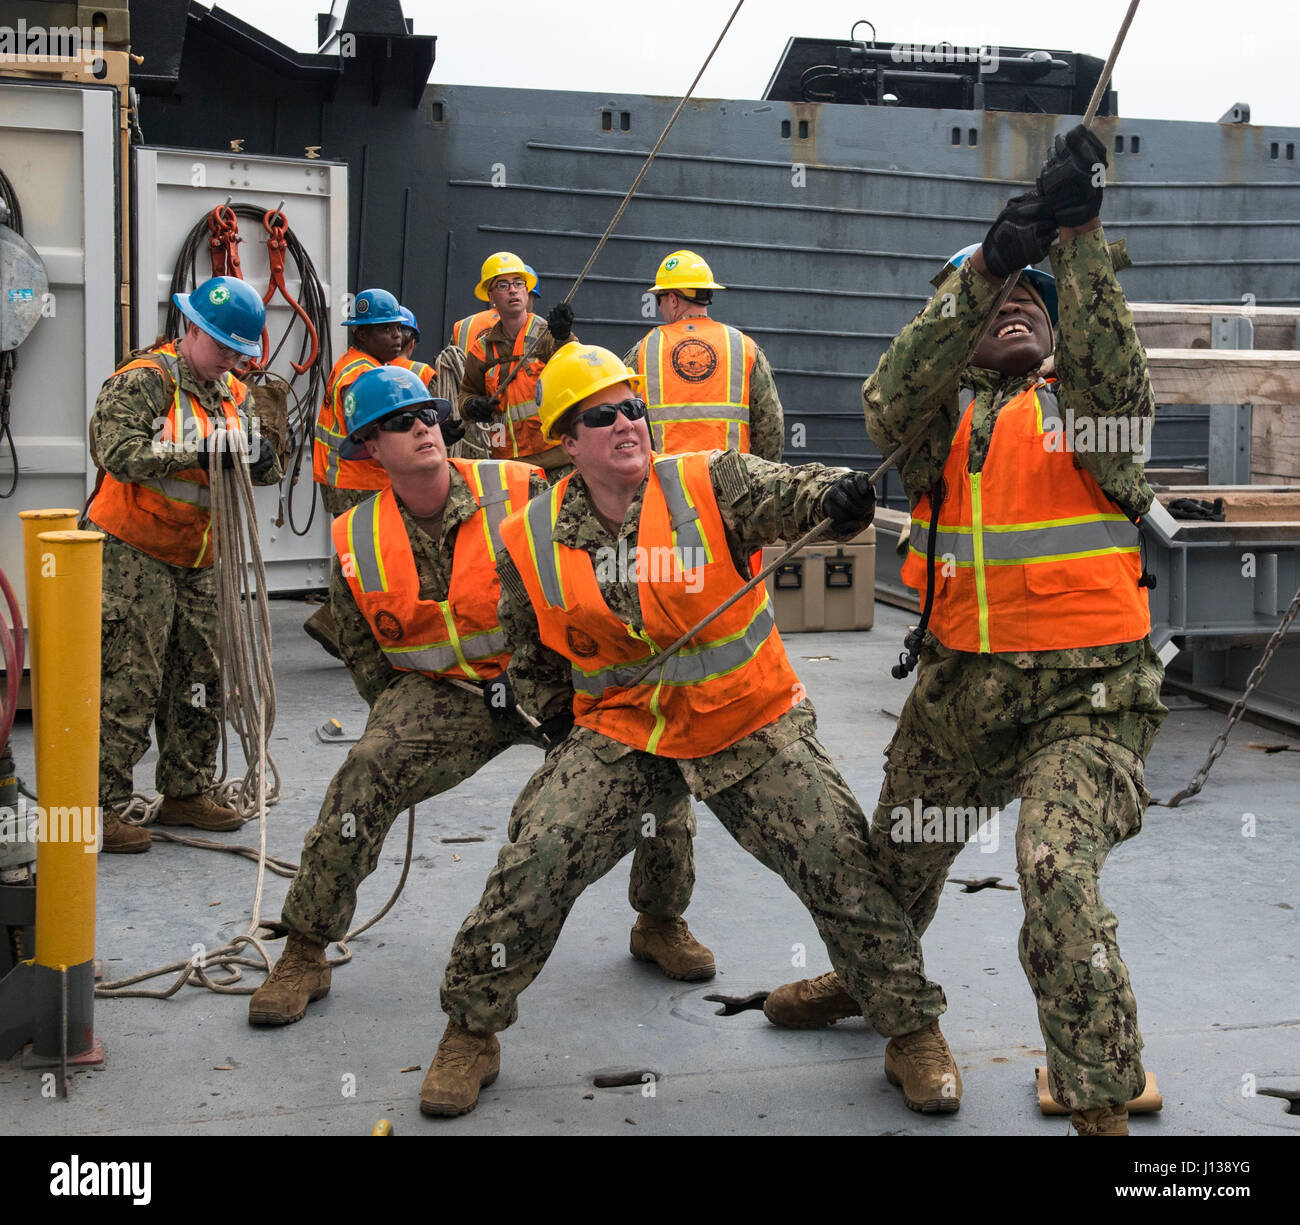 170409-N-OU129-109 POHANG, Republic of Korea (Apr. 9, 2017) Sailors from Navy Cargo Handling Battalion One unload an intermediate module from Navy Maritime Prepositioning Force Ship USNS Pililaau (T-AK 304) using Improved Navy Lighterage System (INLS) off the coast of Pohang, Republic of Korea during Combined Joint Logistics Over the Shore (CJLOTS) April 9. CJLOTS is a biennial exercise conducted by military and civilian personnel from the United States and the Republic of Korea, training to deliver and redeploy military cargo as a part of the large Foal Eagle 2017 exercise. (U.S. Navy photo b Stock Photo